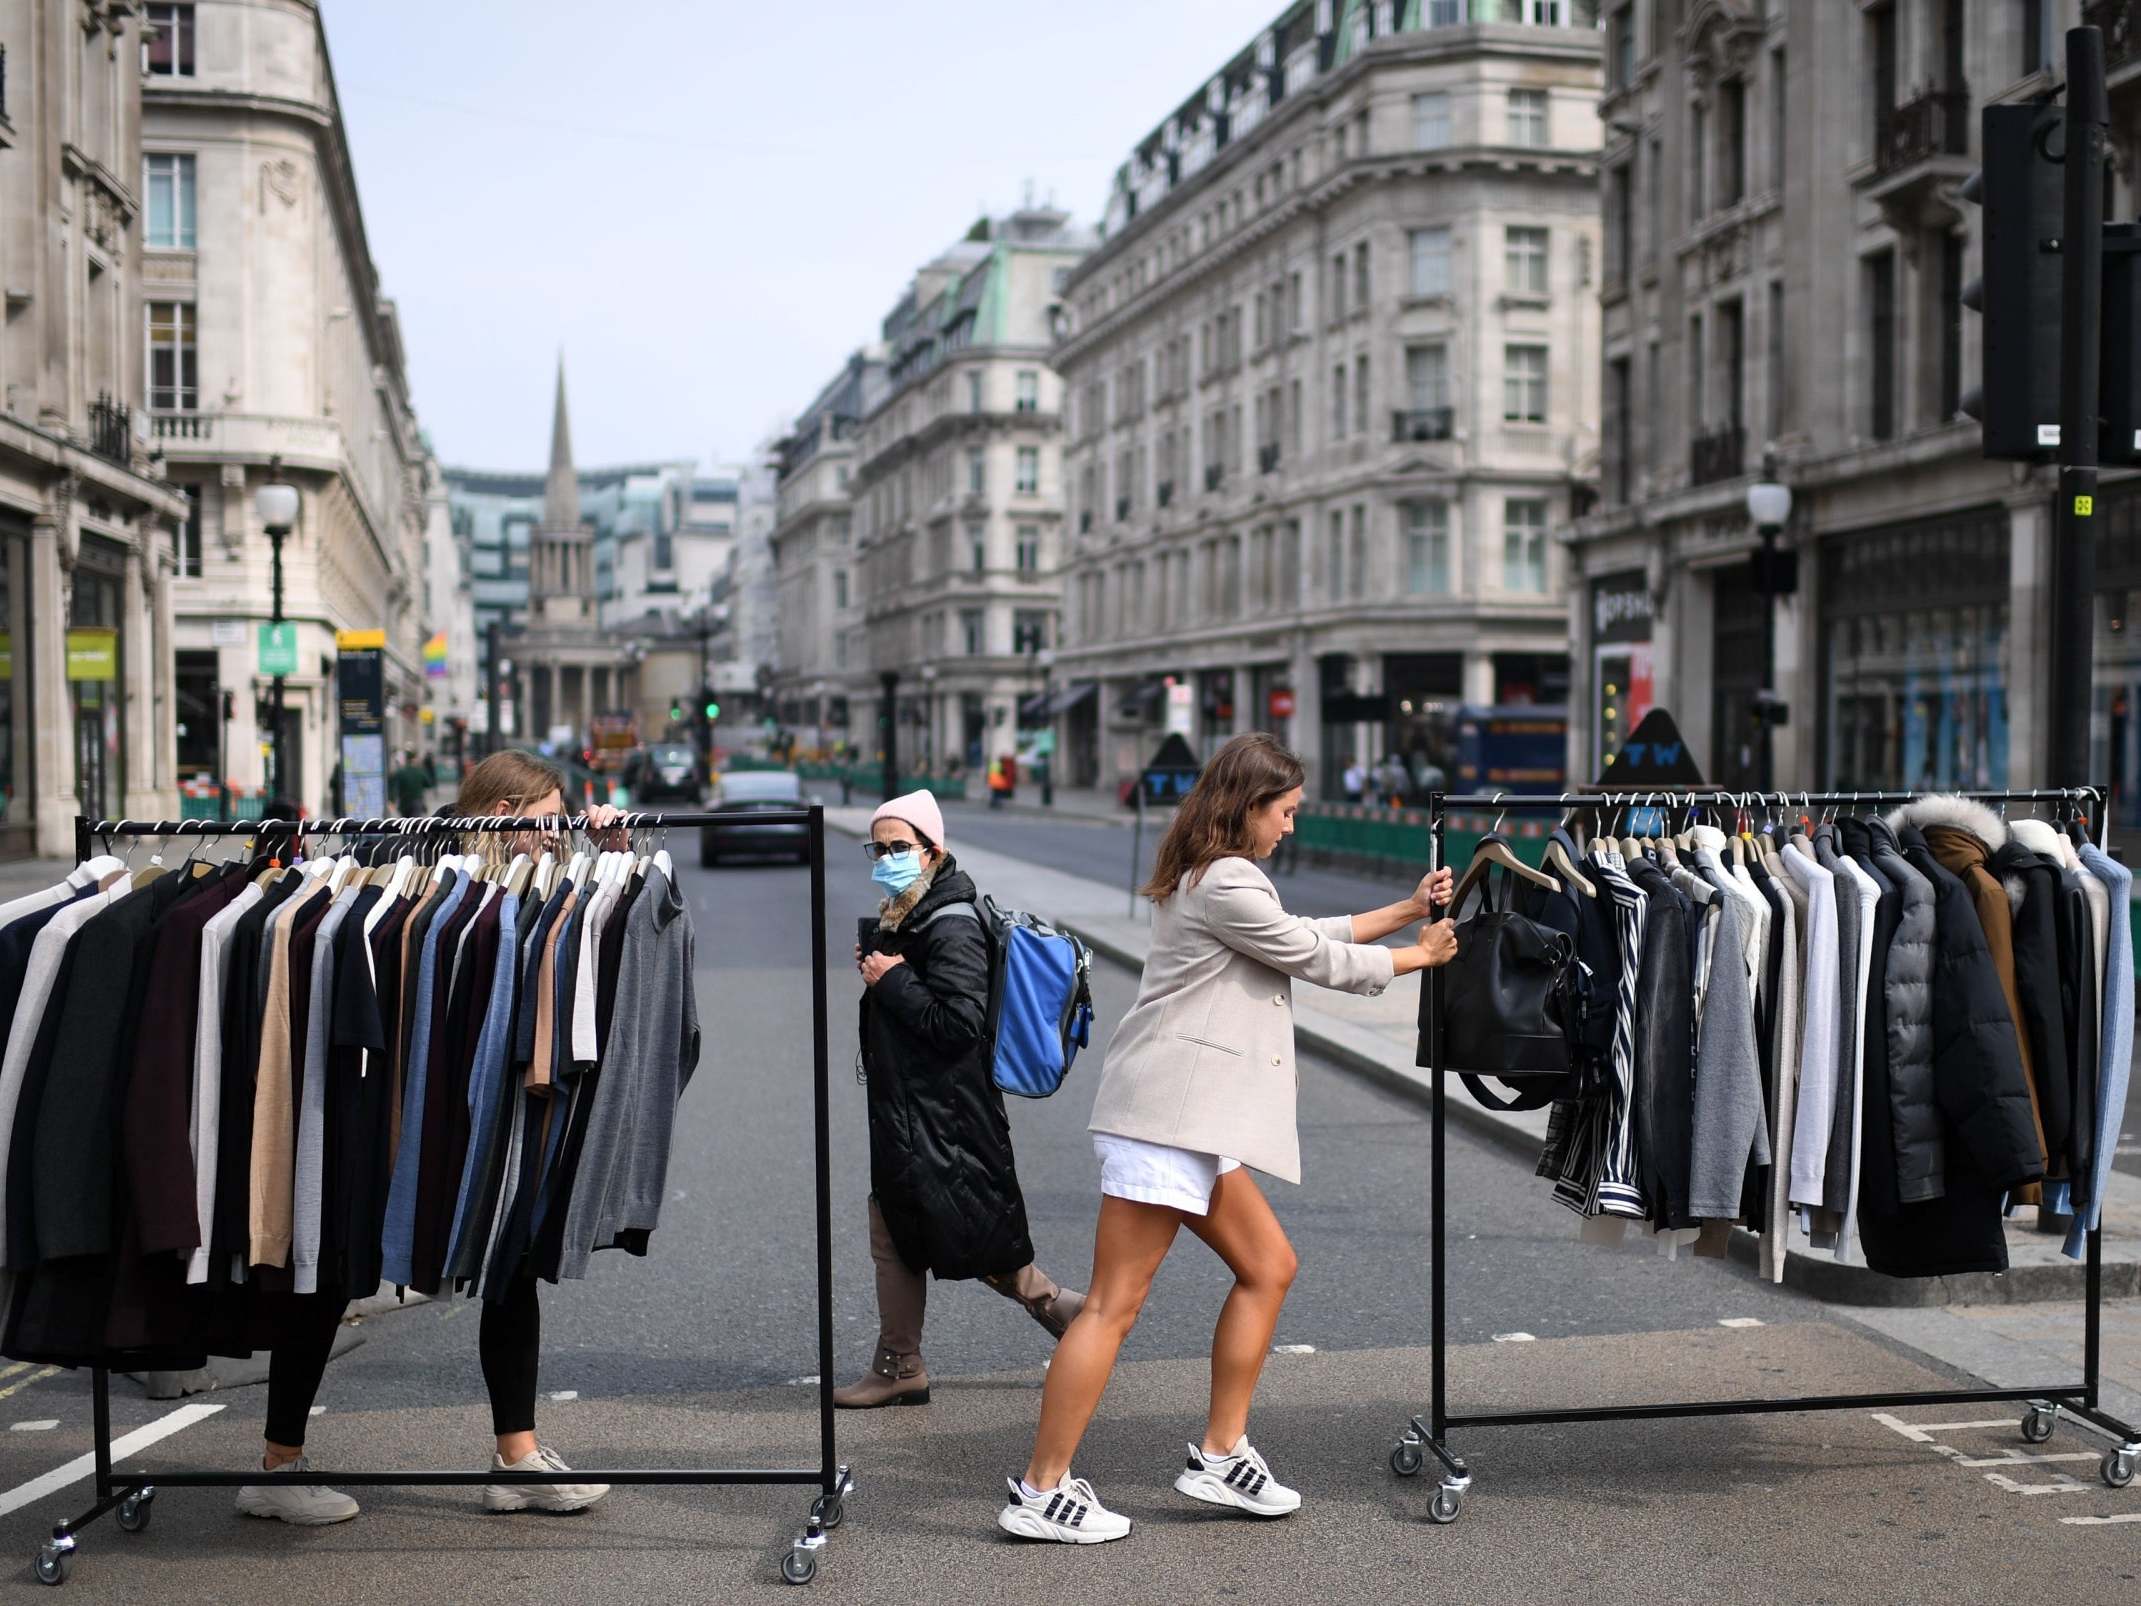 Retail workers move rails of clothes between stores on Oxford Street on 12 June